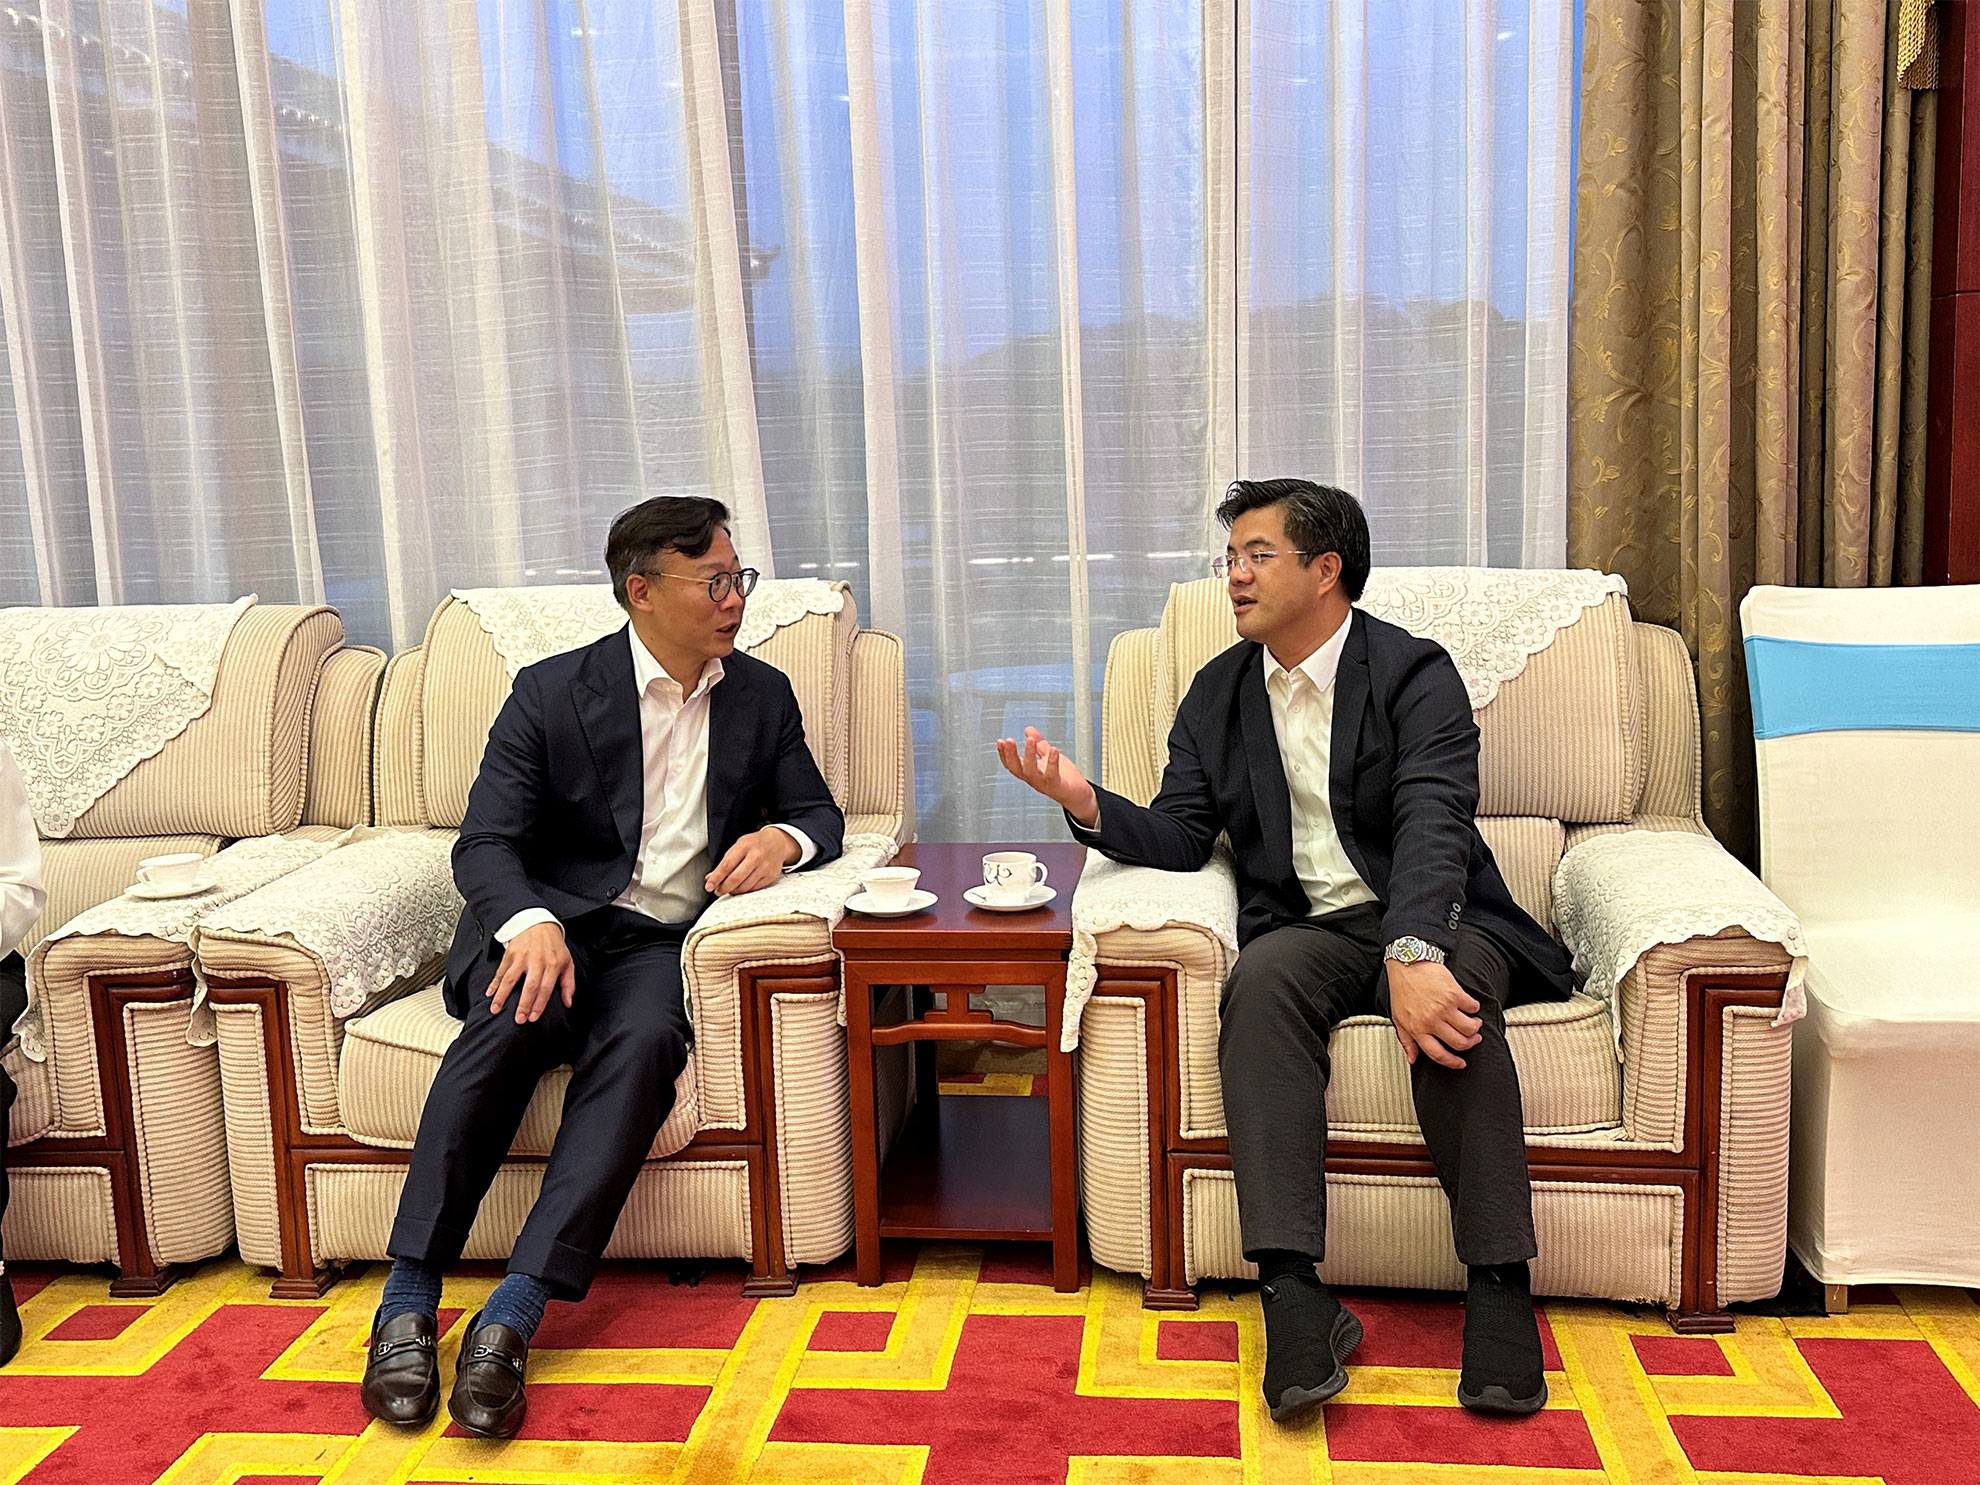 The Deputy Secretary for Justice, Mr Cheung Kwok-kwan (left), led a delegation comprising young lawyers and law students to meet with Standing Committee Member and Head of the United Front Work Department of the CPC Huizhou Municipal Committee, Mr Lai Jianhua (right), today (September 7).